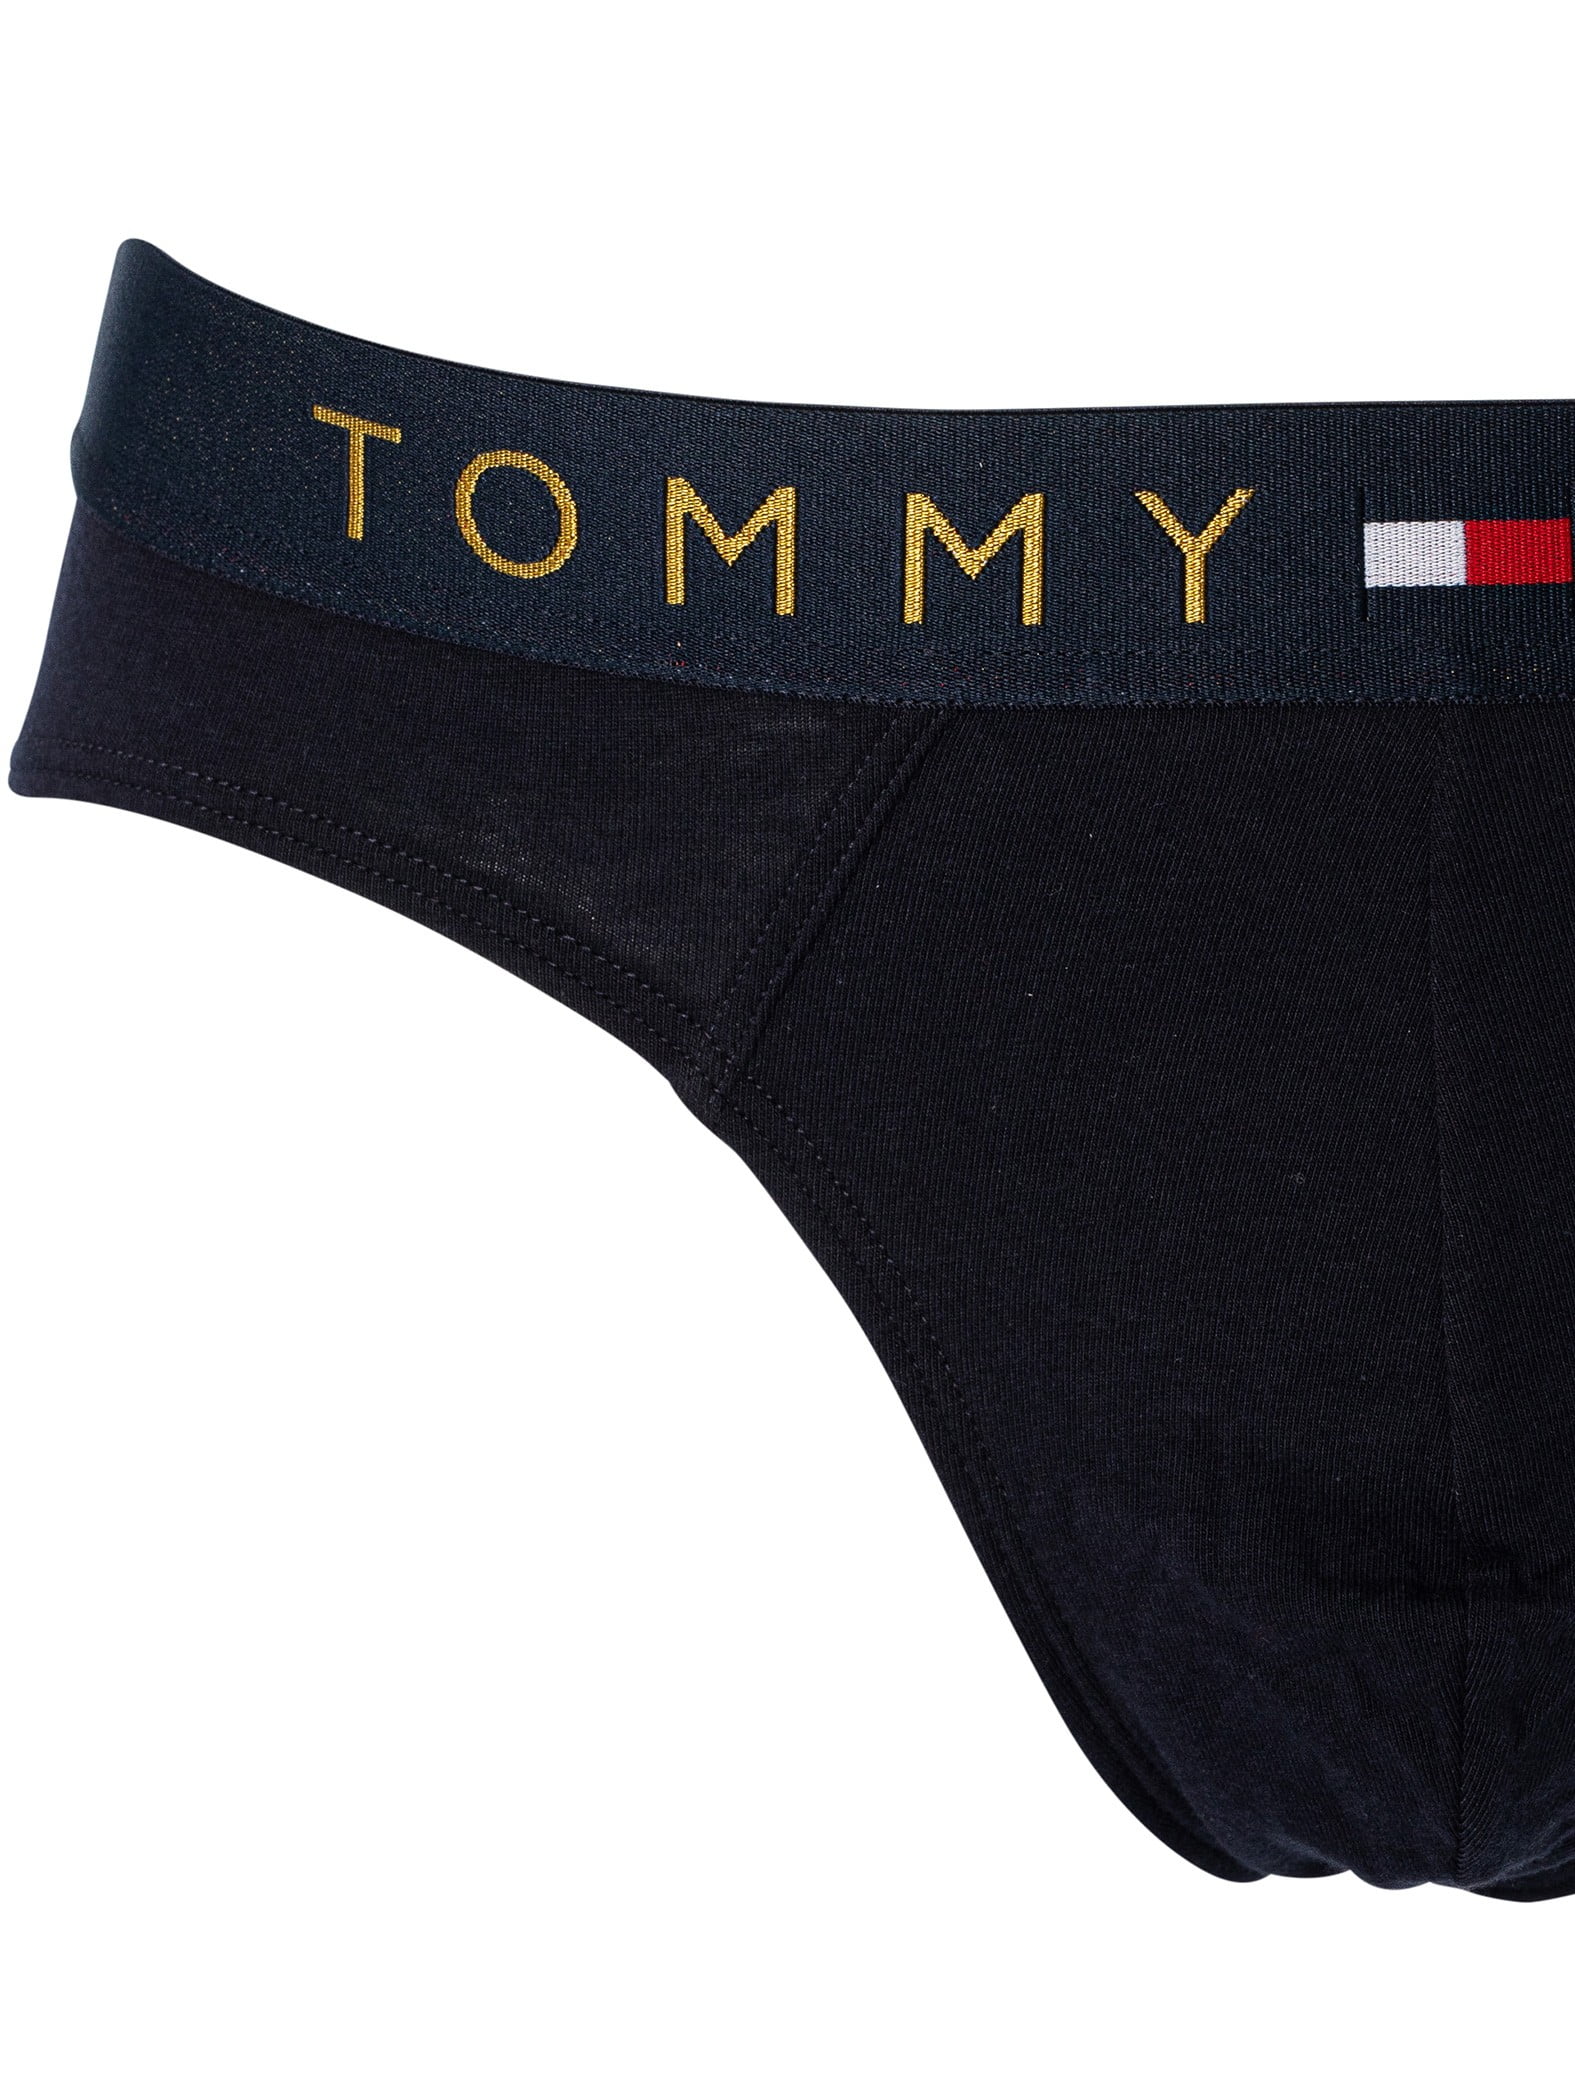 Tommy Hilfiger 5 Multicoloured Gold WB Briefs, Pack